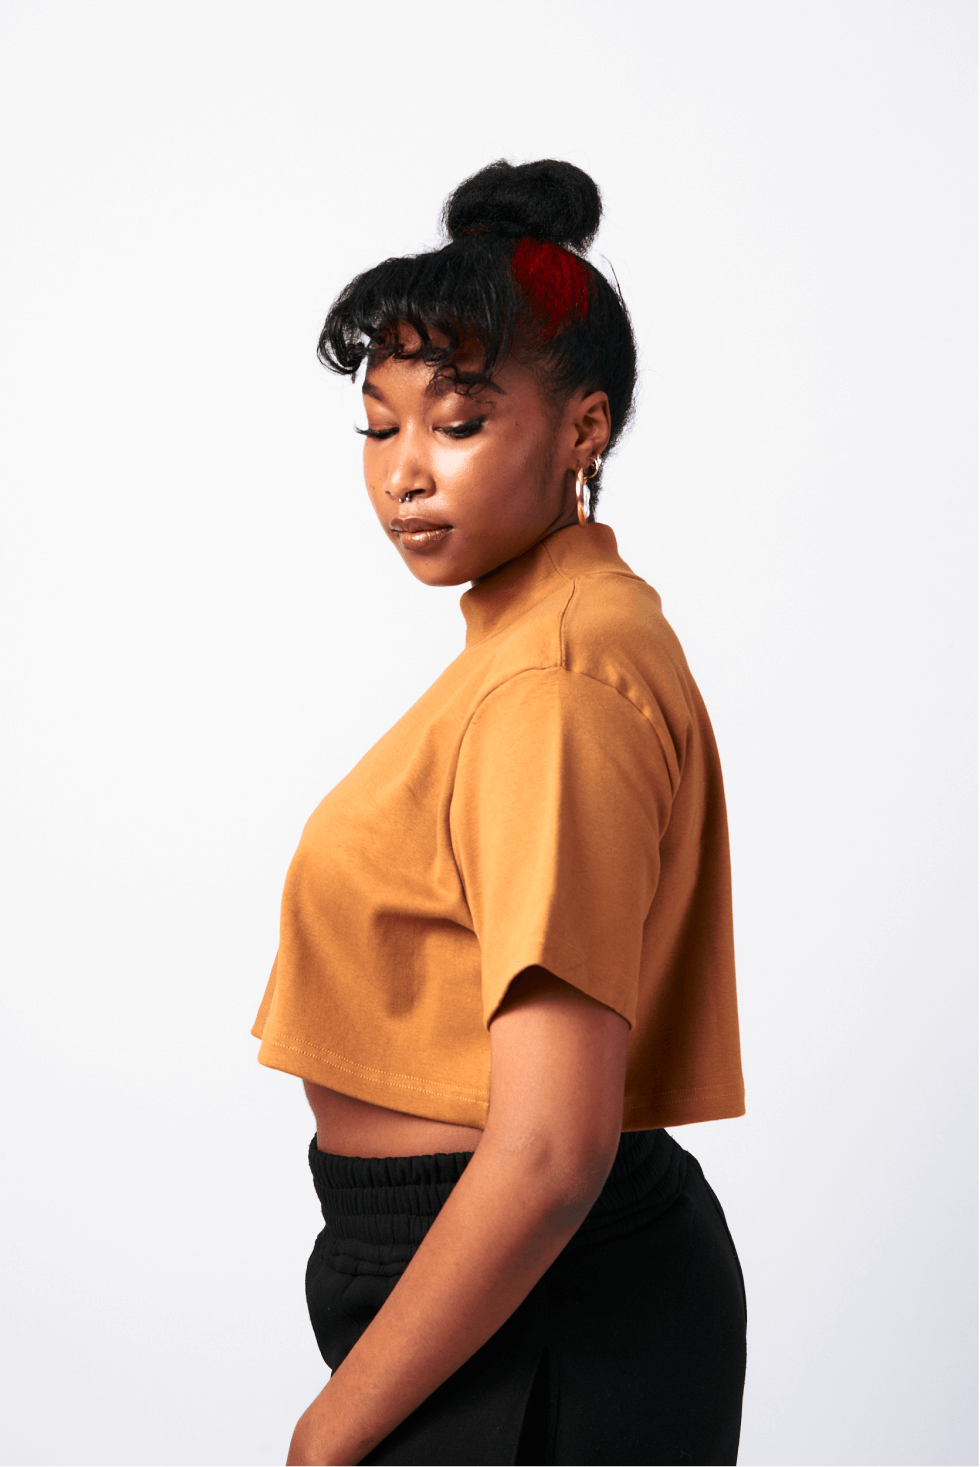 Shop Nala Crop Top by At Odds on Arrai. Discover stylish, affordable clothing, jewelry, handbags and unique handmade pieces from top Kenyan & African fashion brands prioritising sustainability and quality craftsmanship.